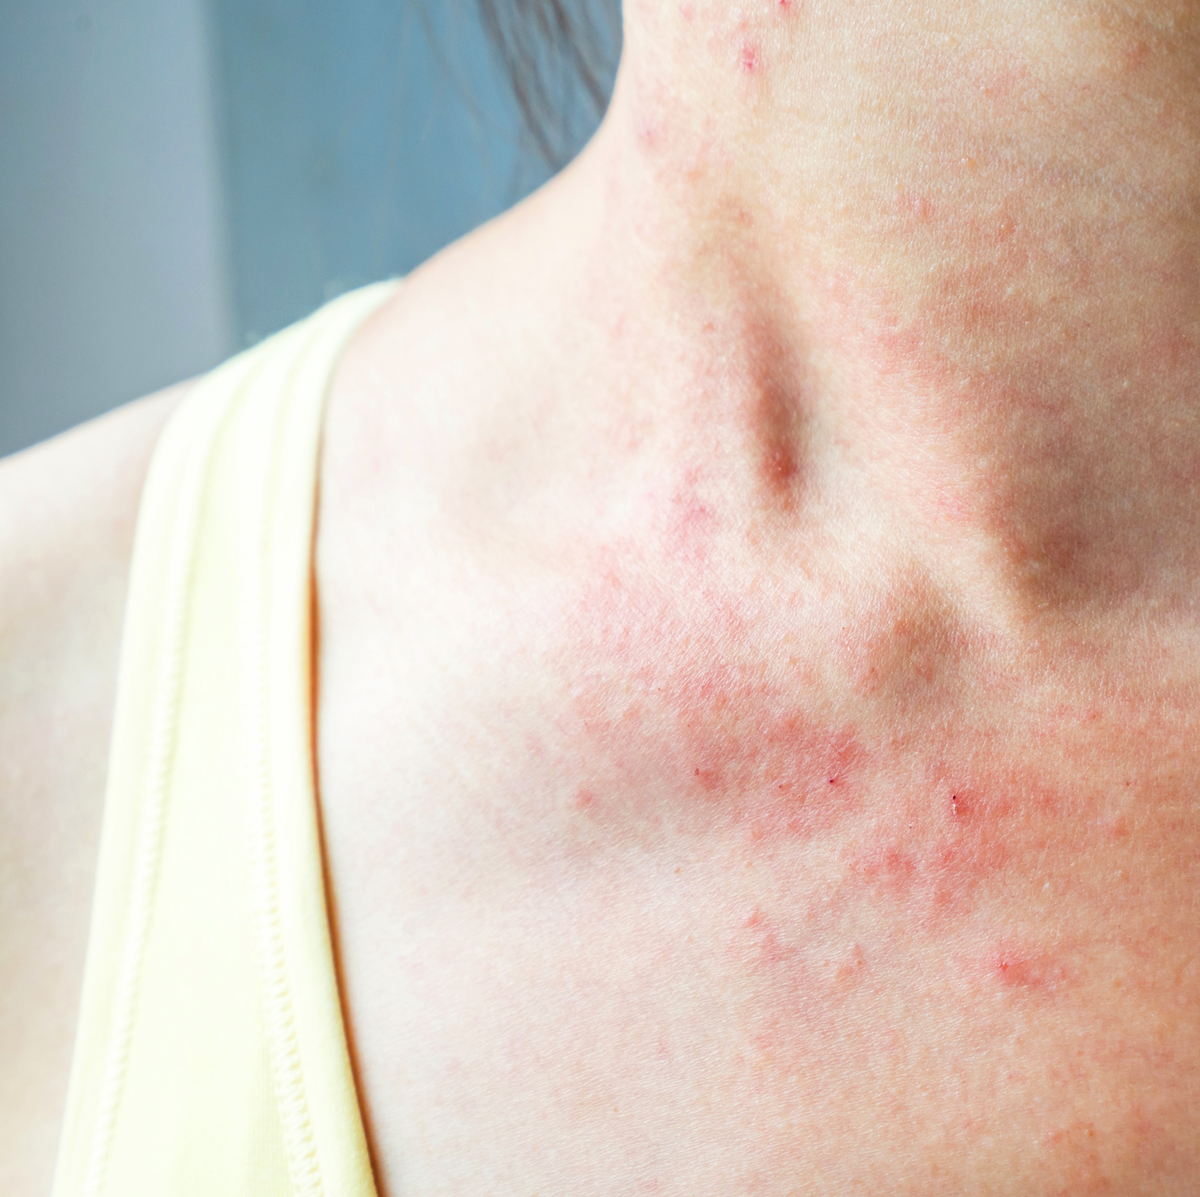 6 Reasons to Seek Medical Attention for Your Skin Rash